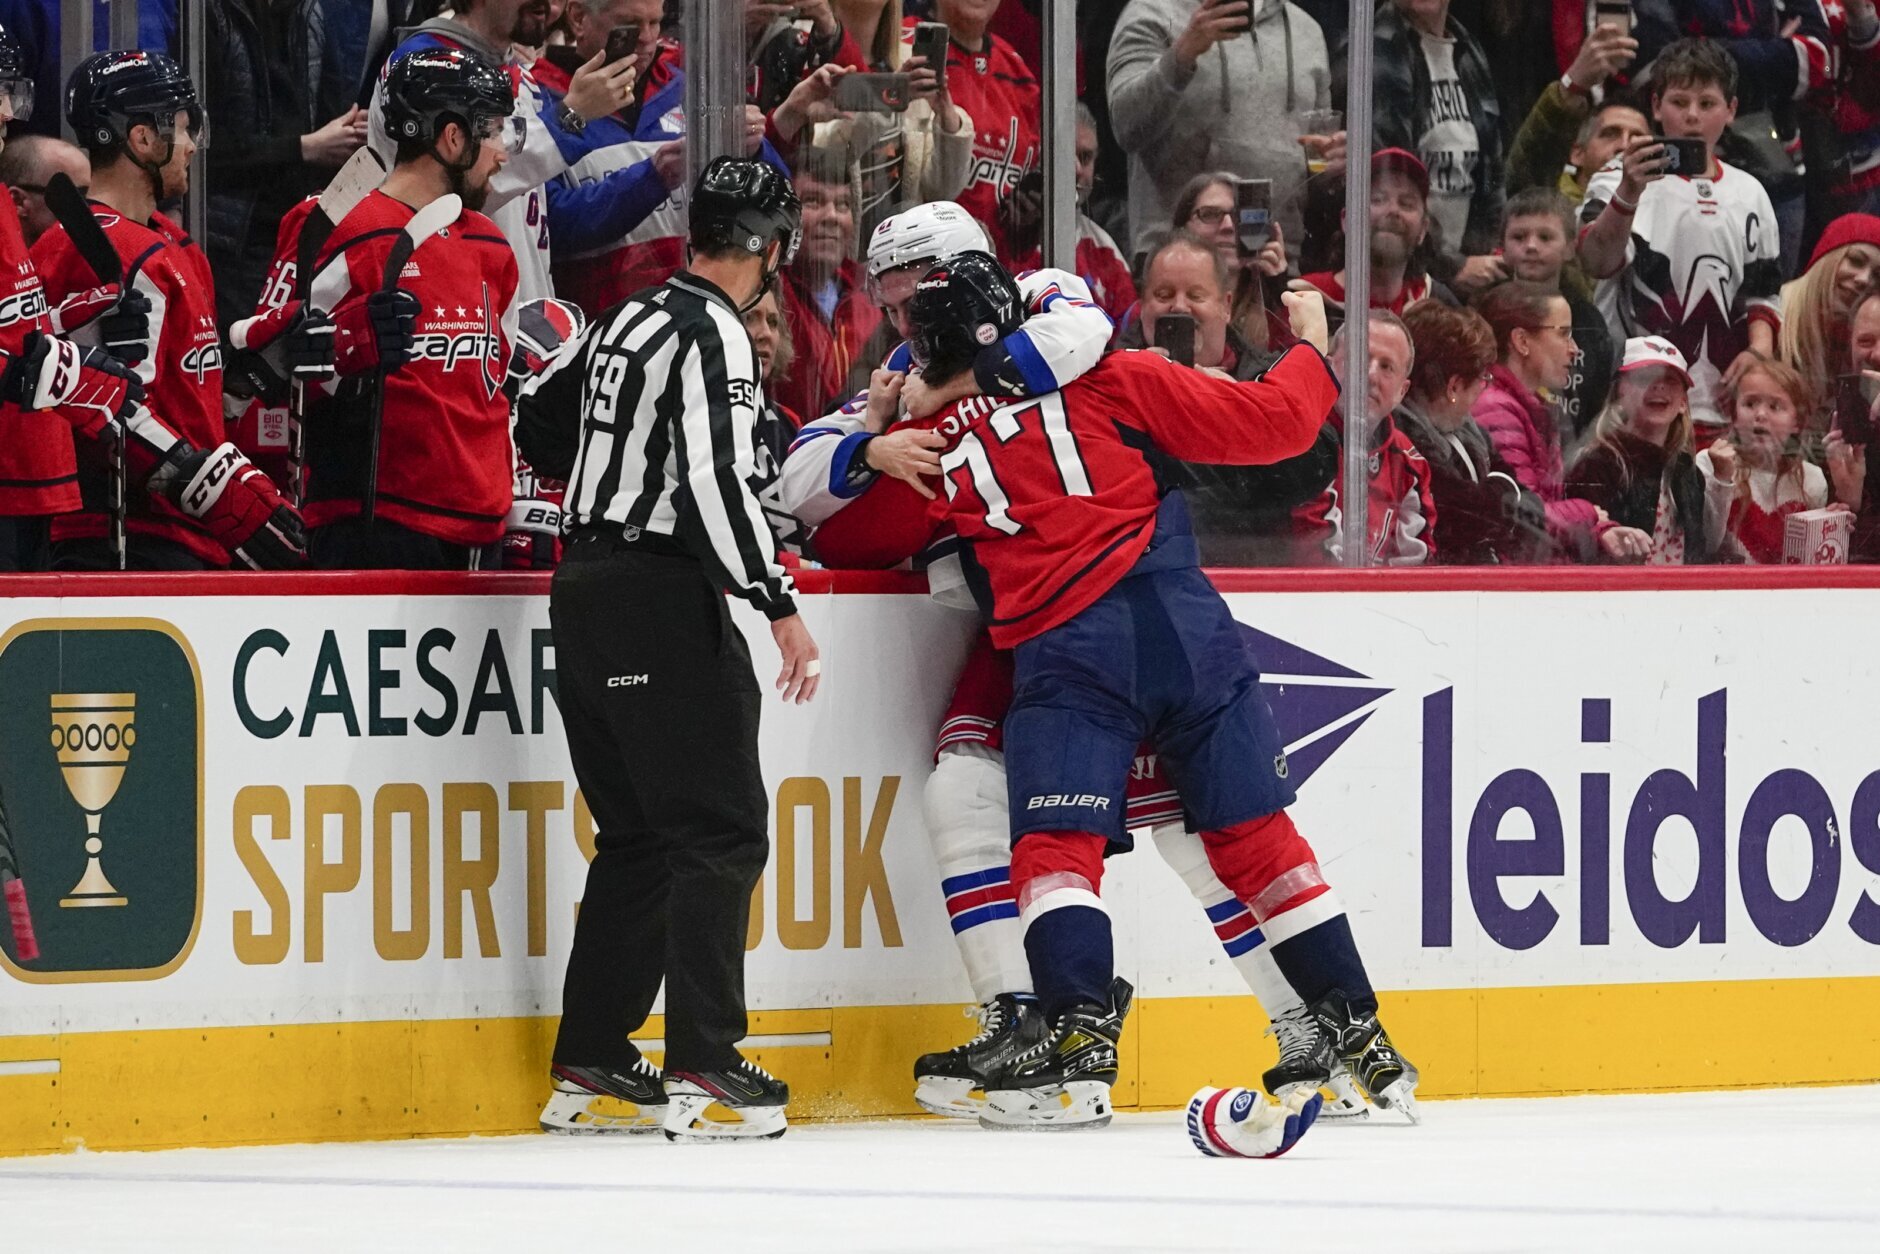 Capitals Open Bidding For 2022 Capitals Hockey Fights Cancer Auction